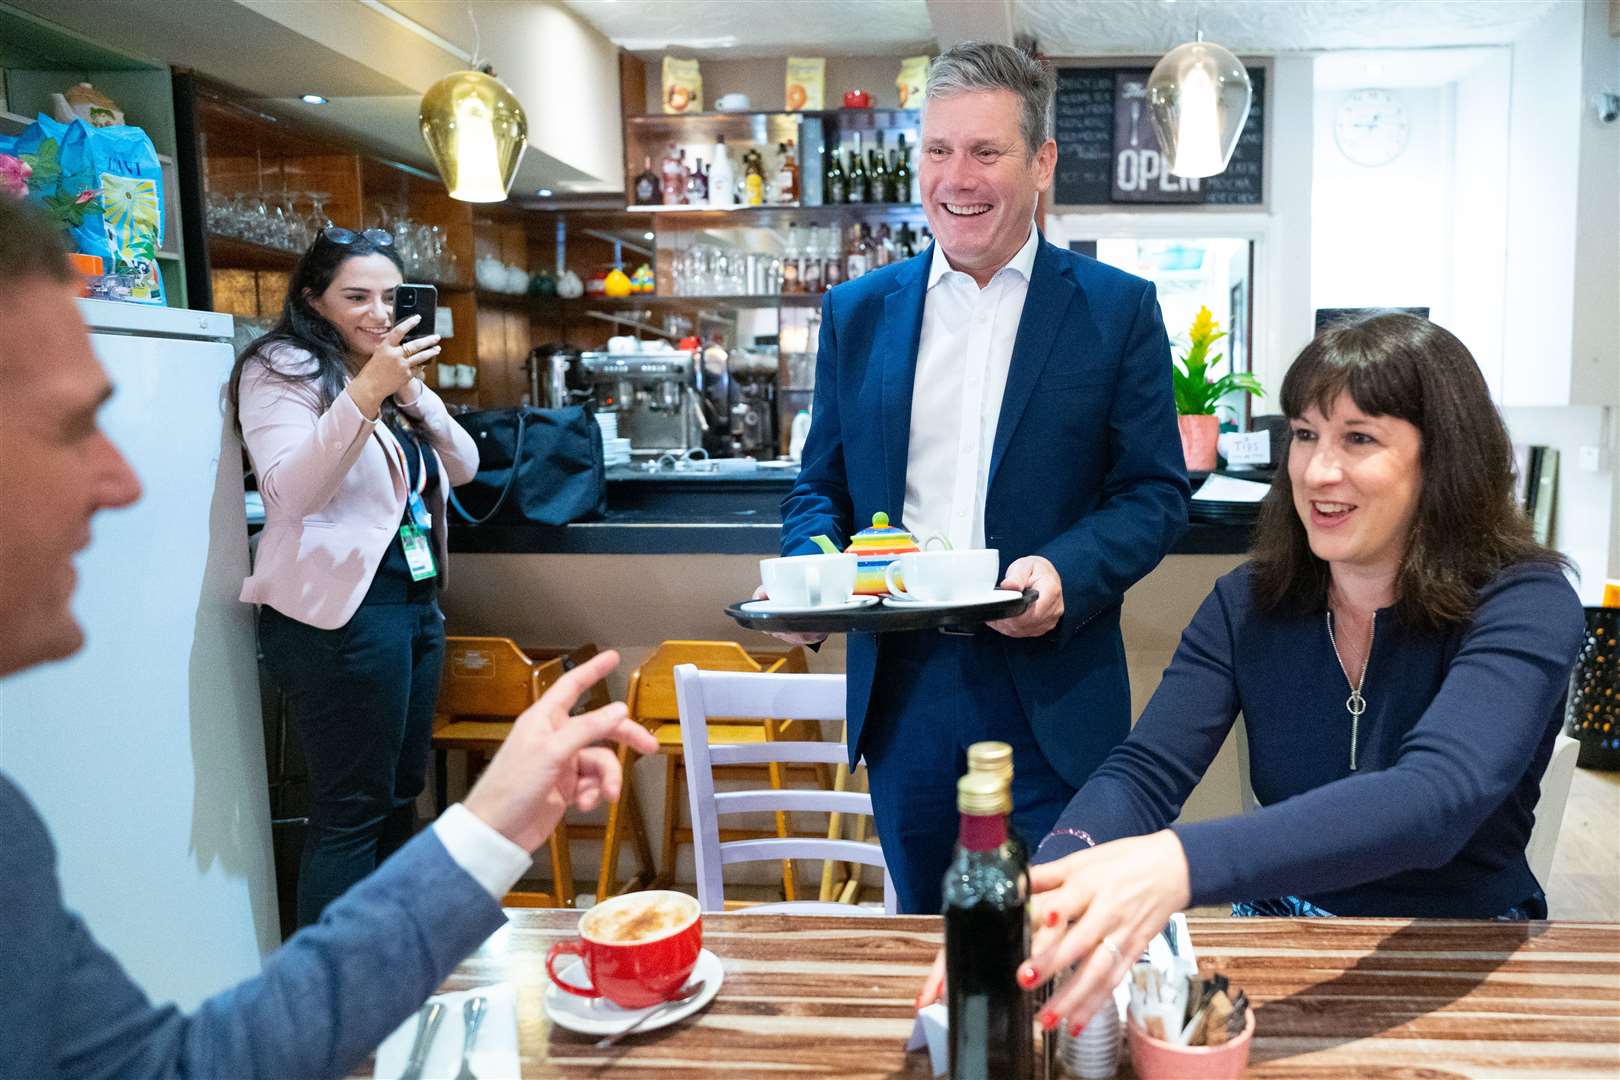 Labour Party leader Sir Keir Starmer, shadow chancellor Rachel Reeves and Hove MP Peter Kyle (Stefan Rousseau/PA)